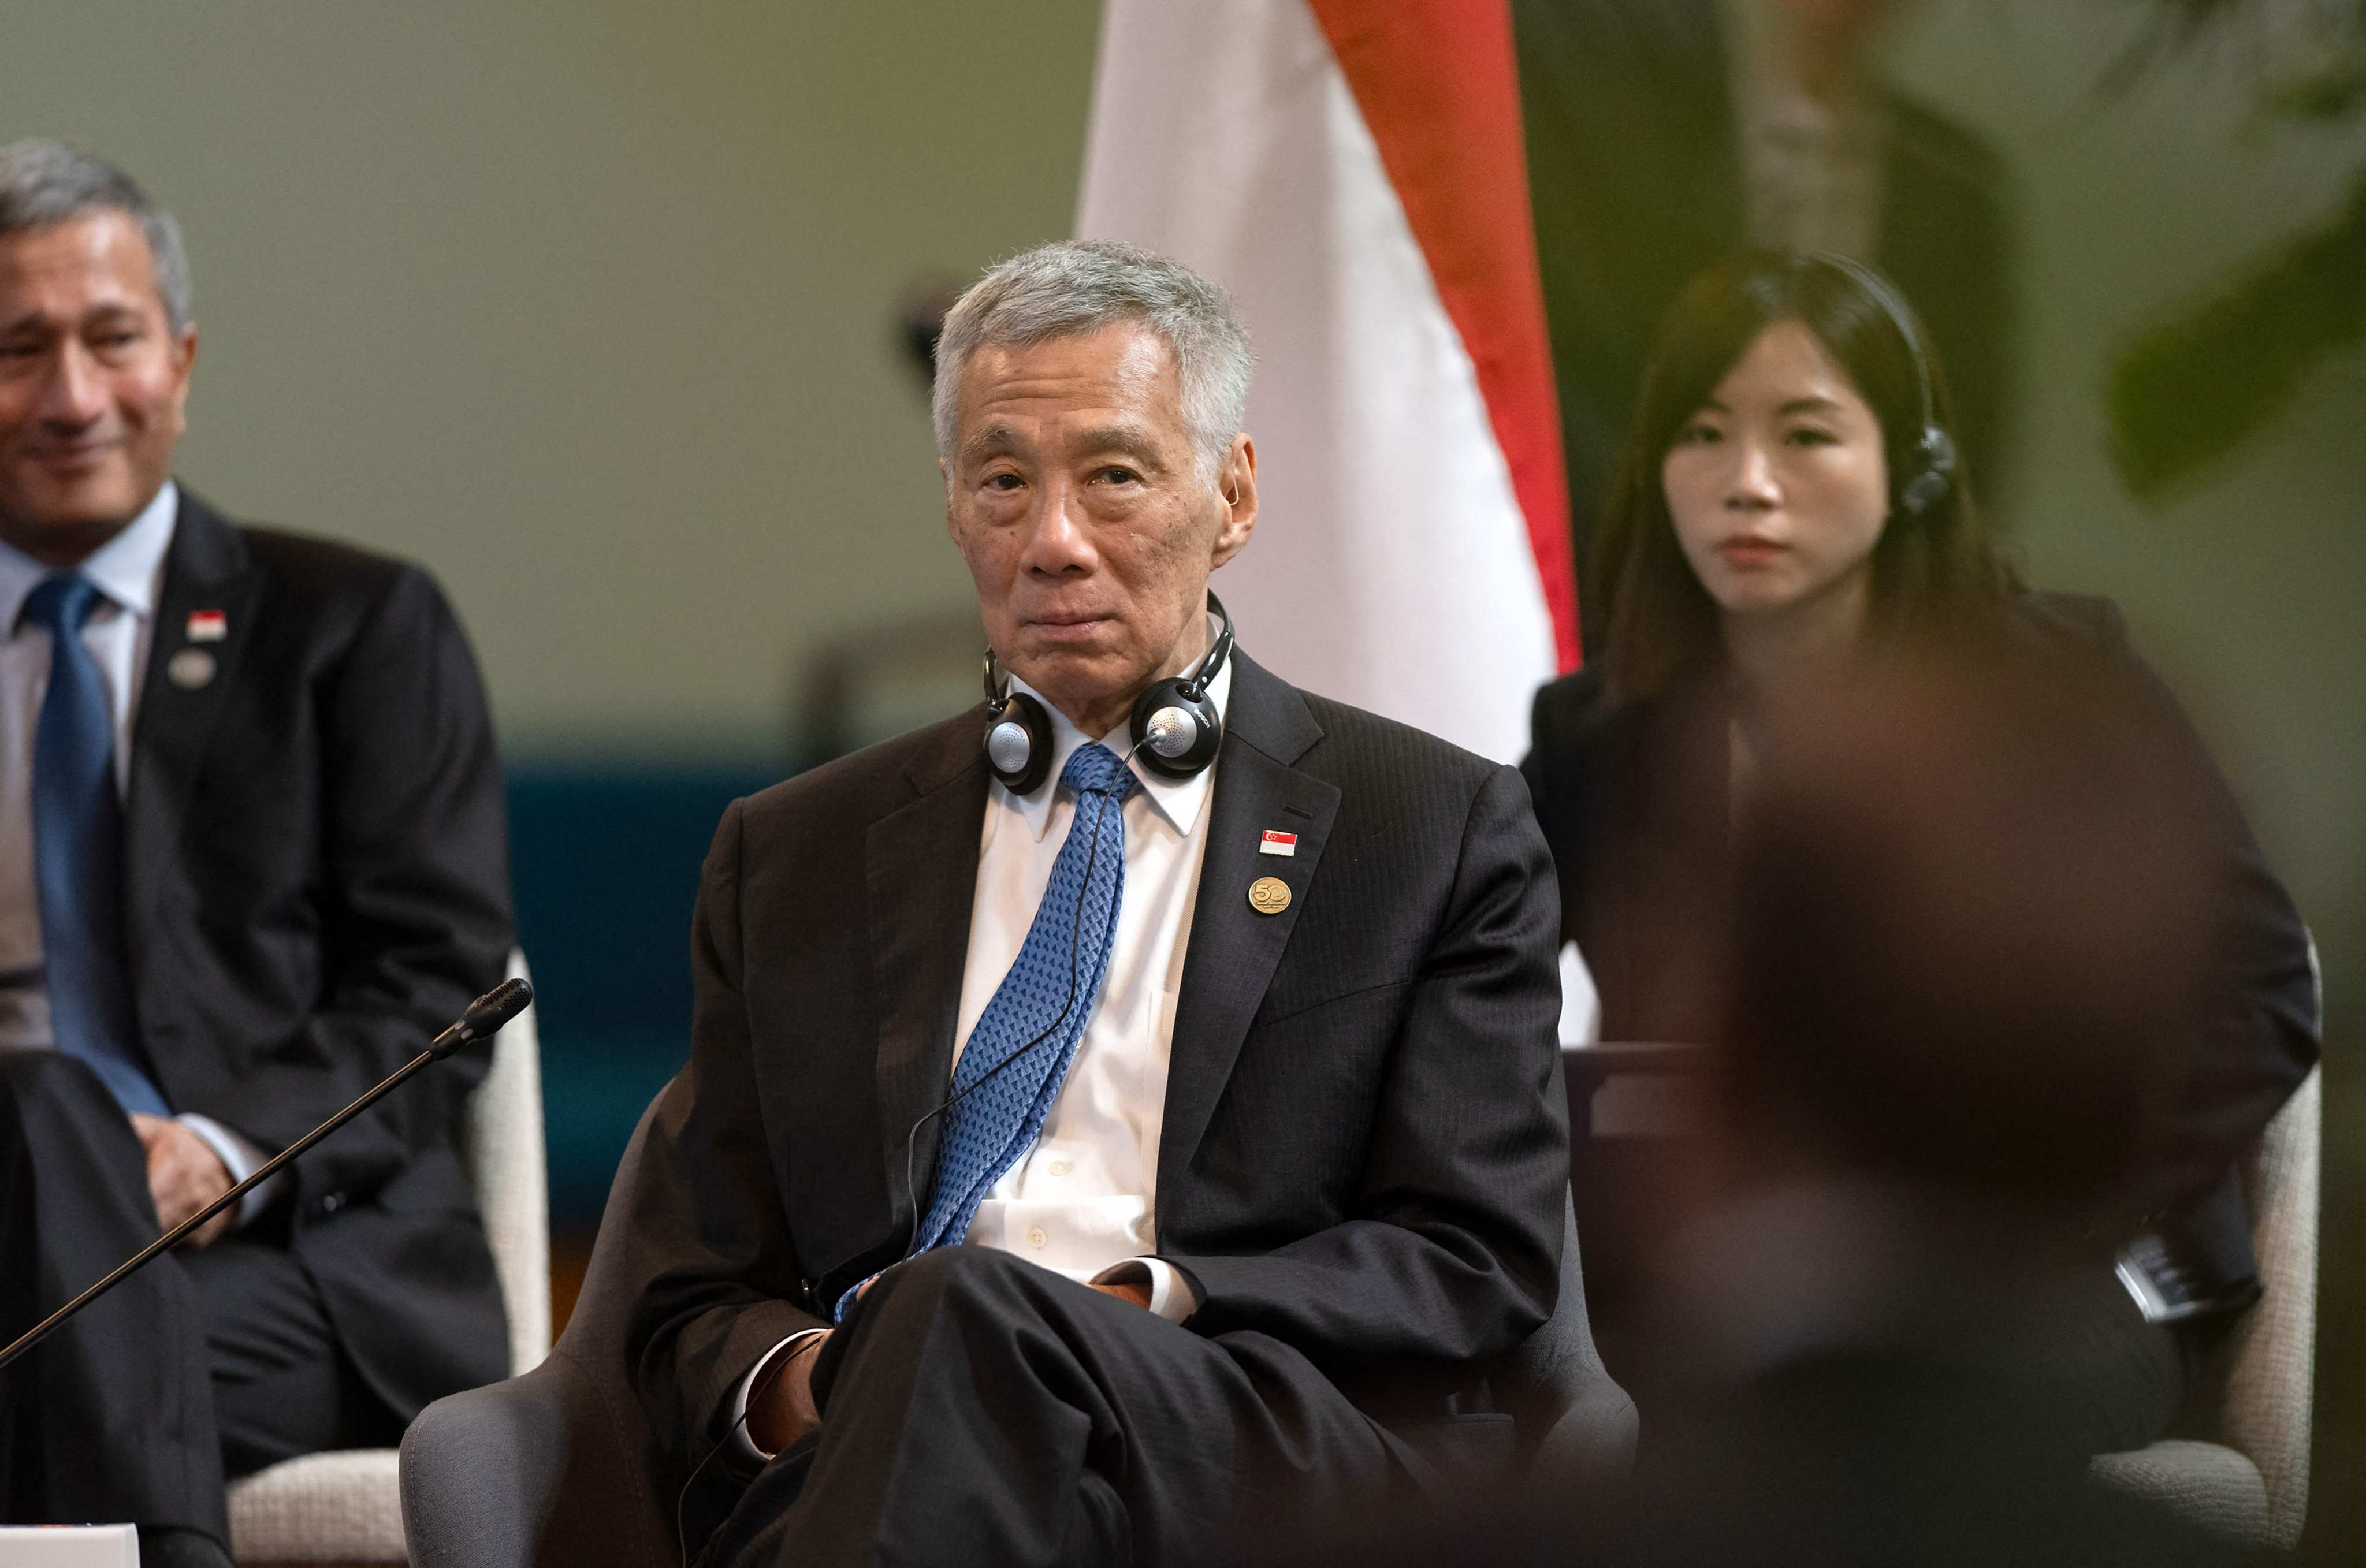 Singapore’s Prime Minister Lee Hsien Loong attends the Asean-Australia summit in Melbourne on March 6. Photo: AFP